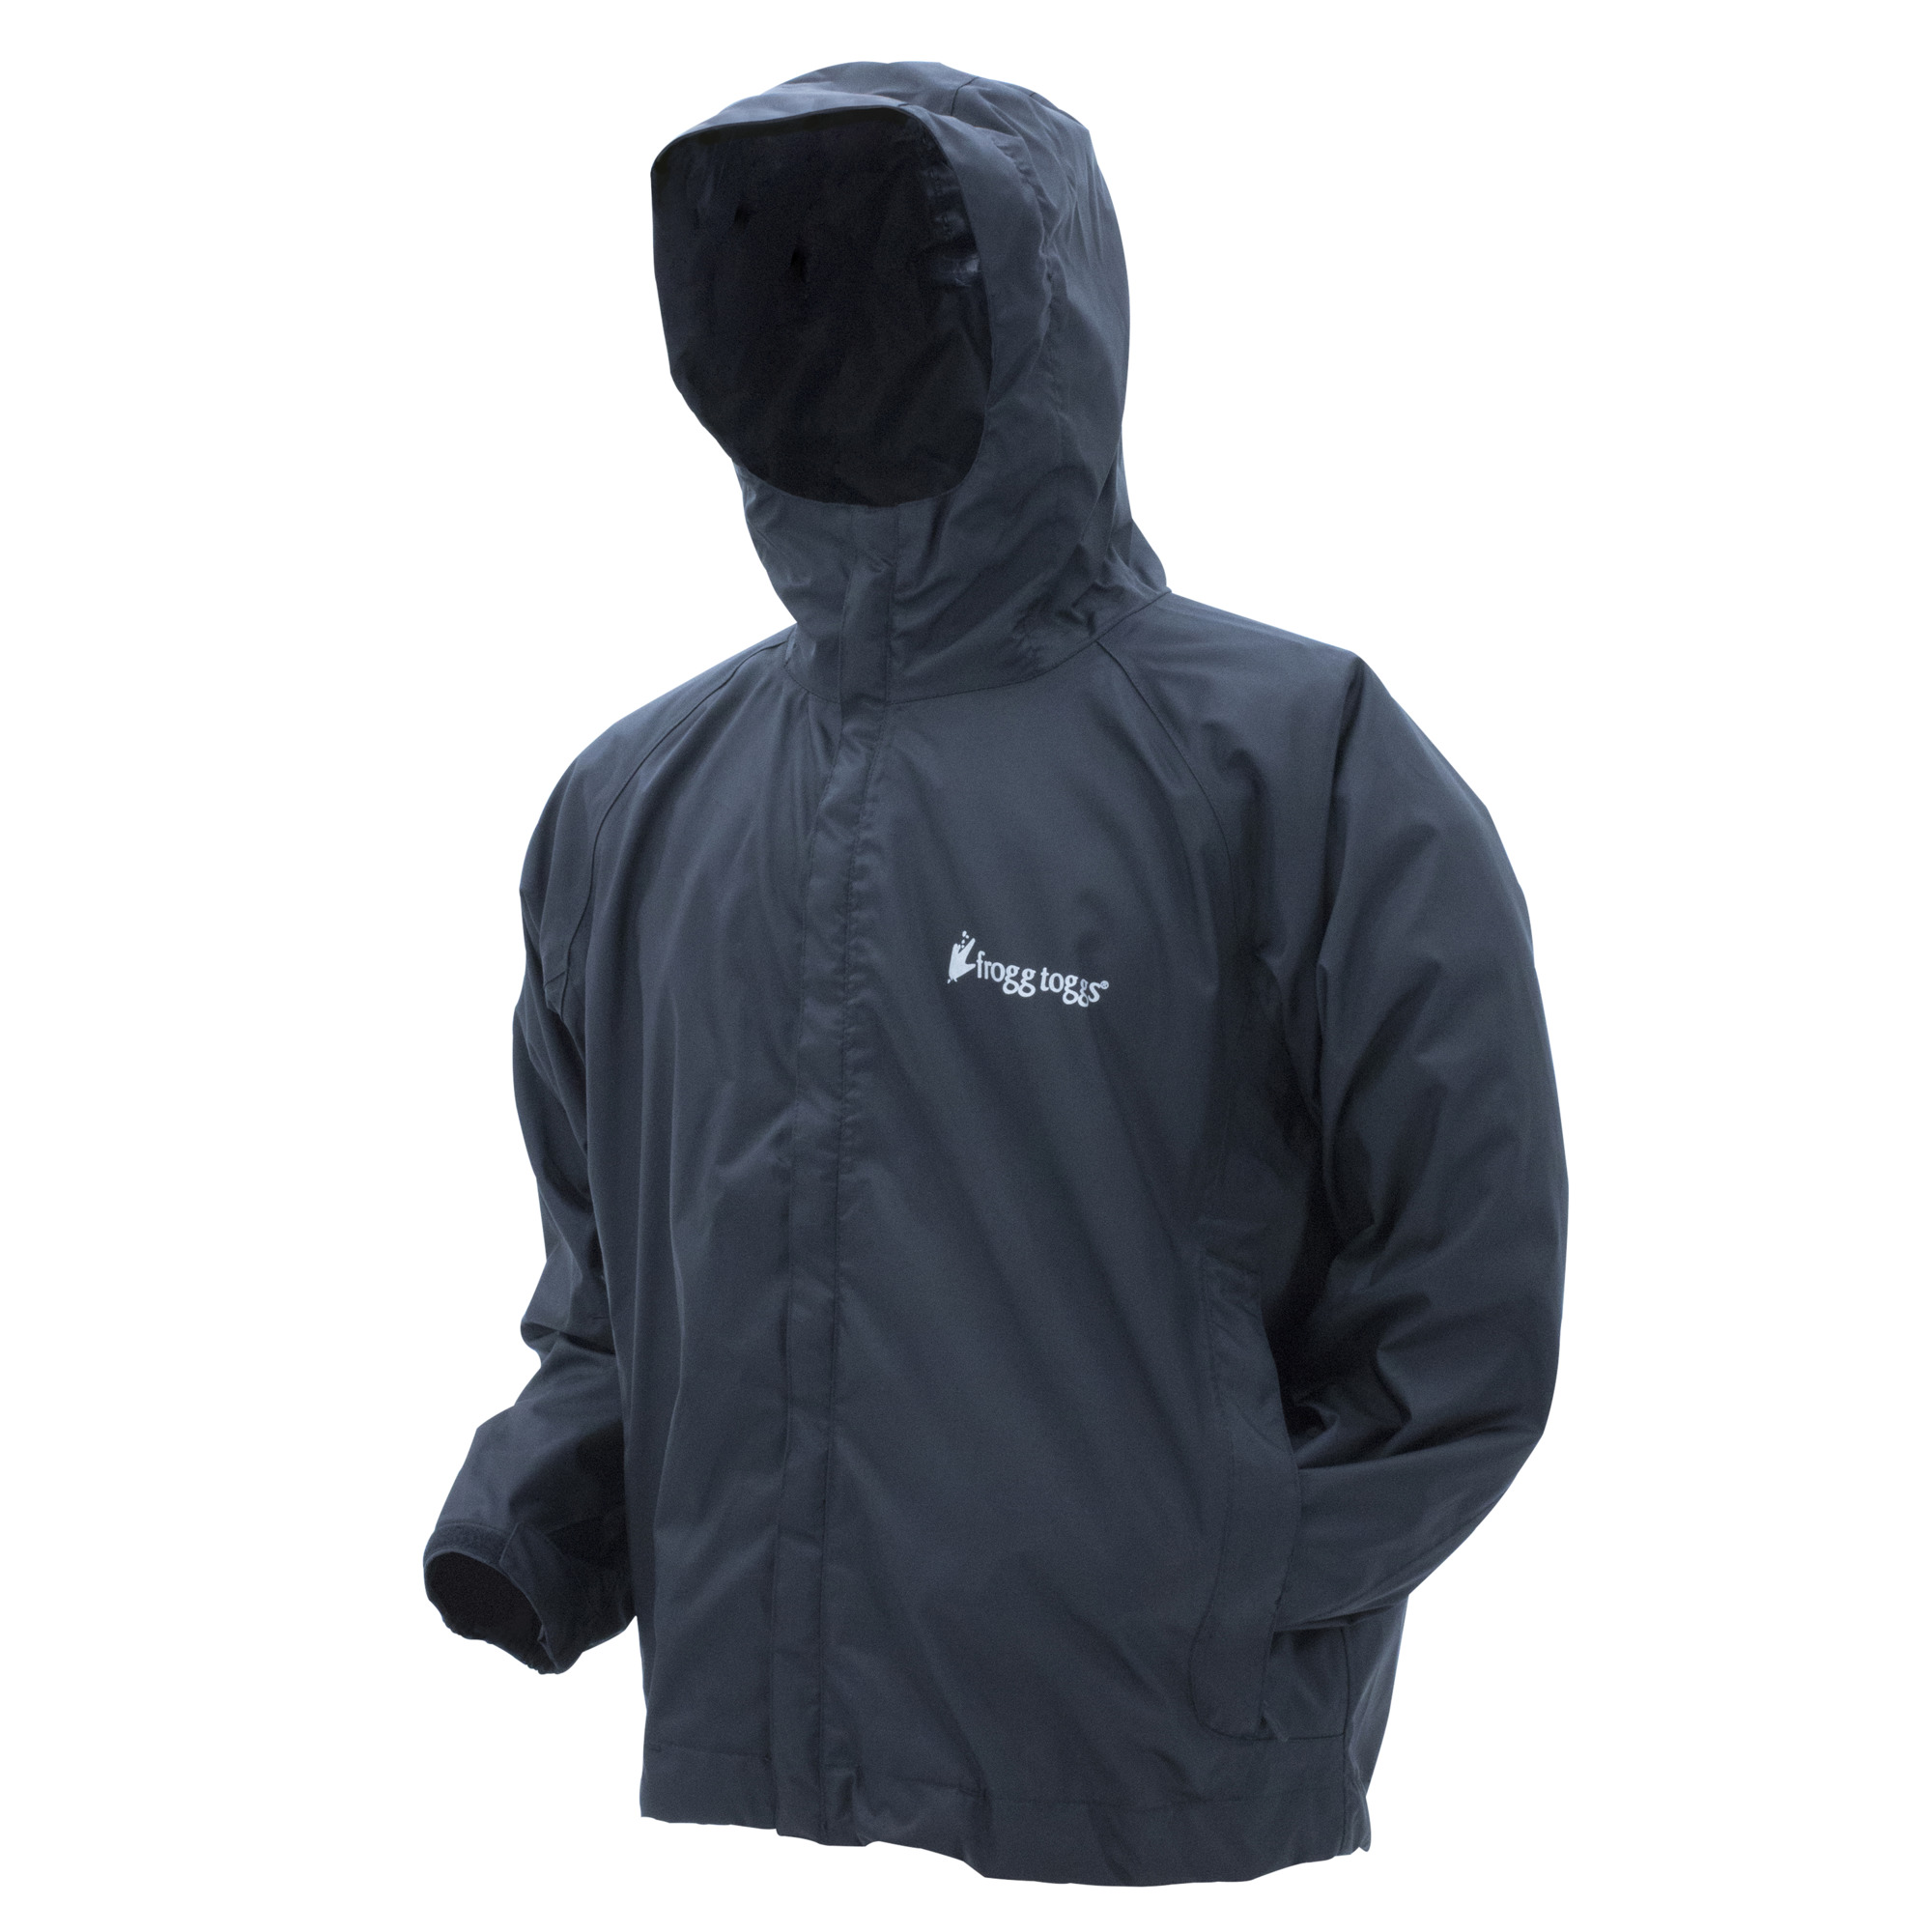 frogg toggs, StormWatch Jacket, Size 3XL, Color Black, Model SW62123-013X